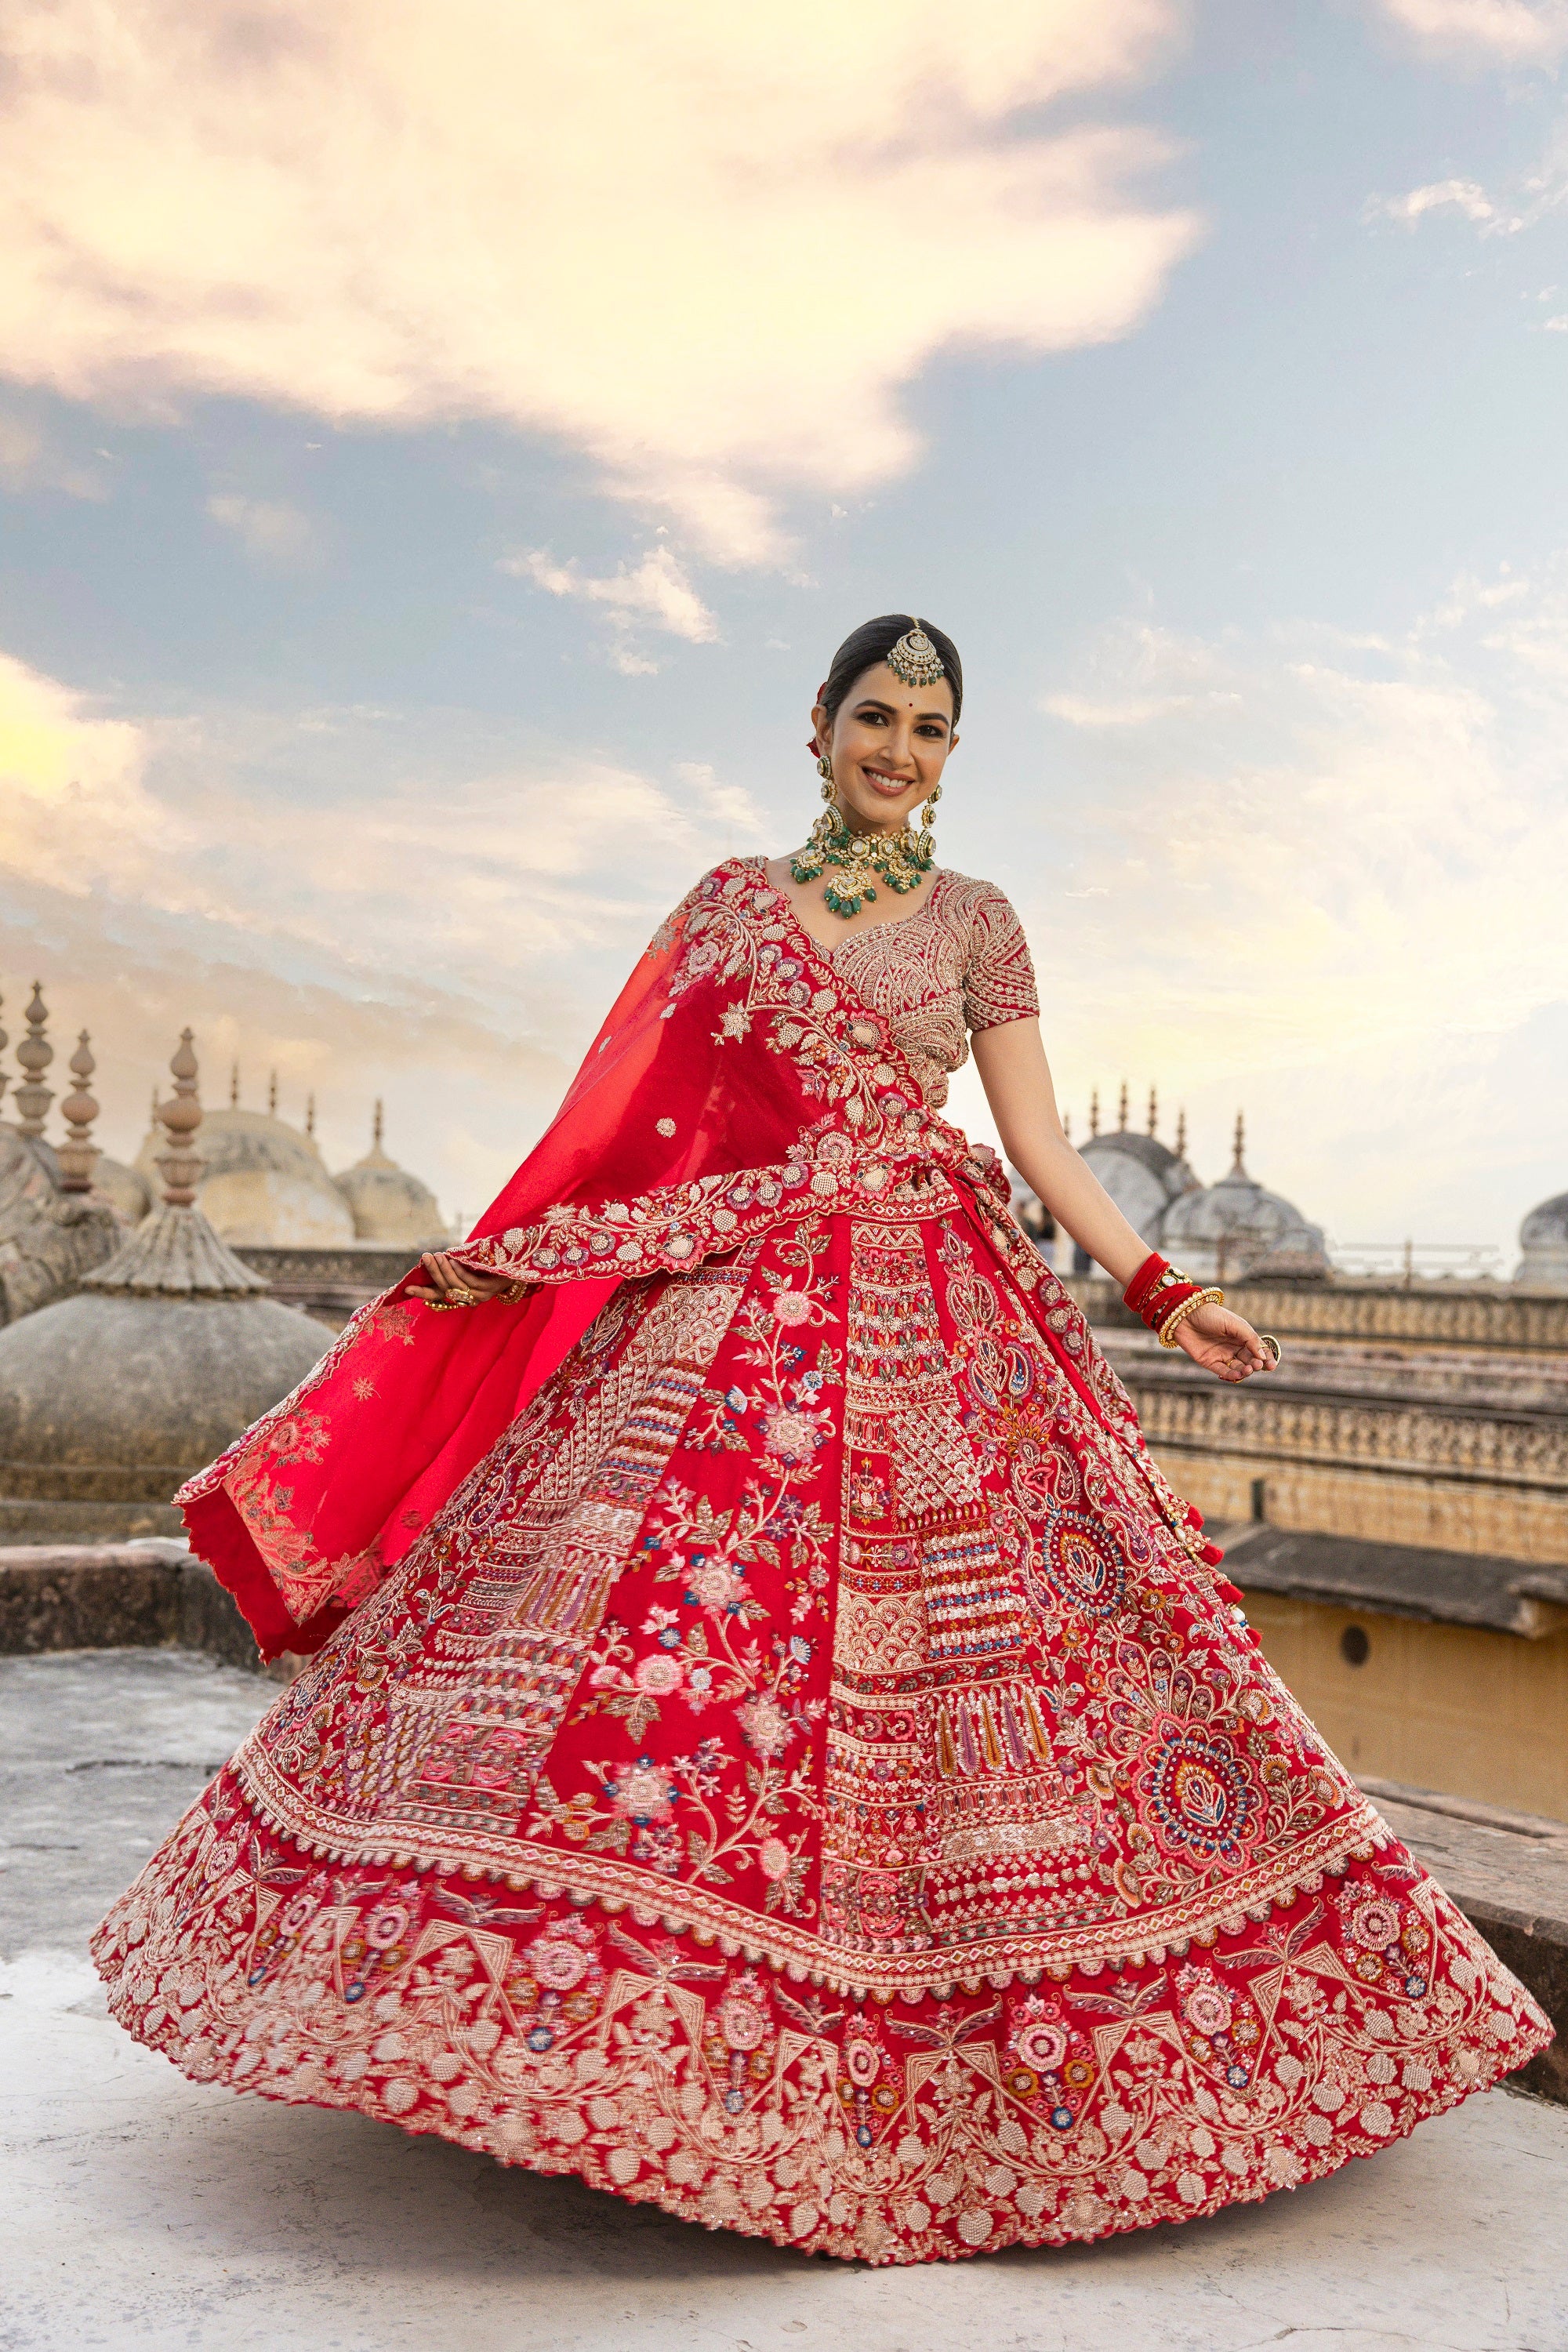 Red Lehenga and Jewelry Combinations you can't go wrong with! | Red lehenga,  Lehenga, South indian bride